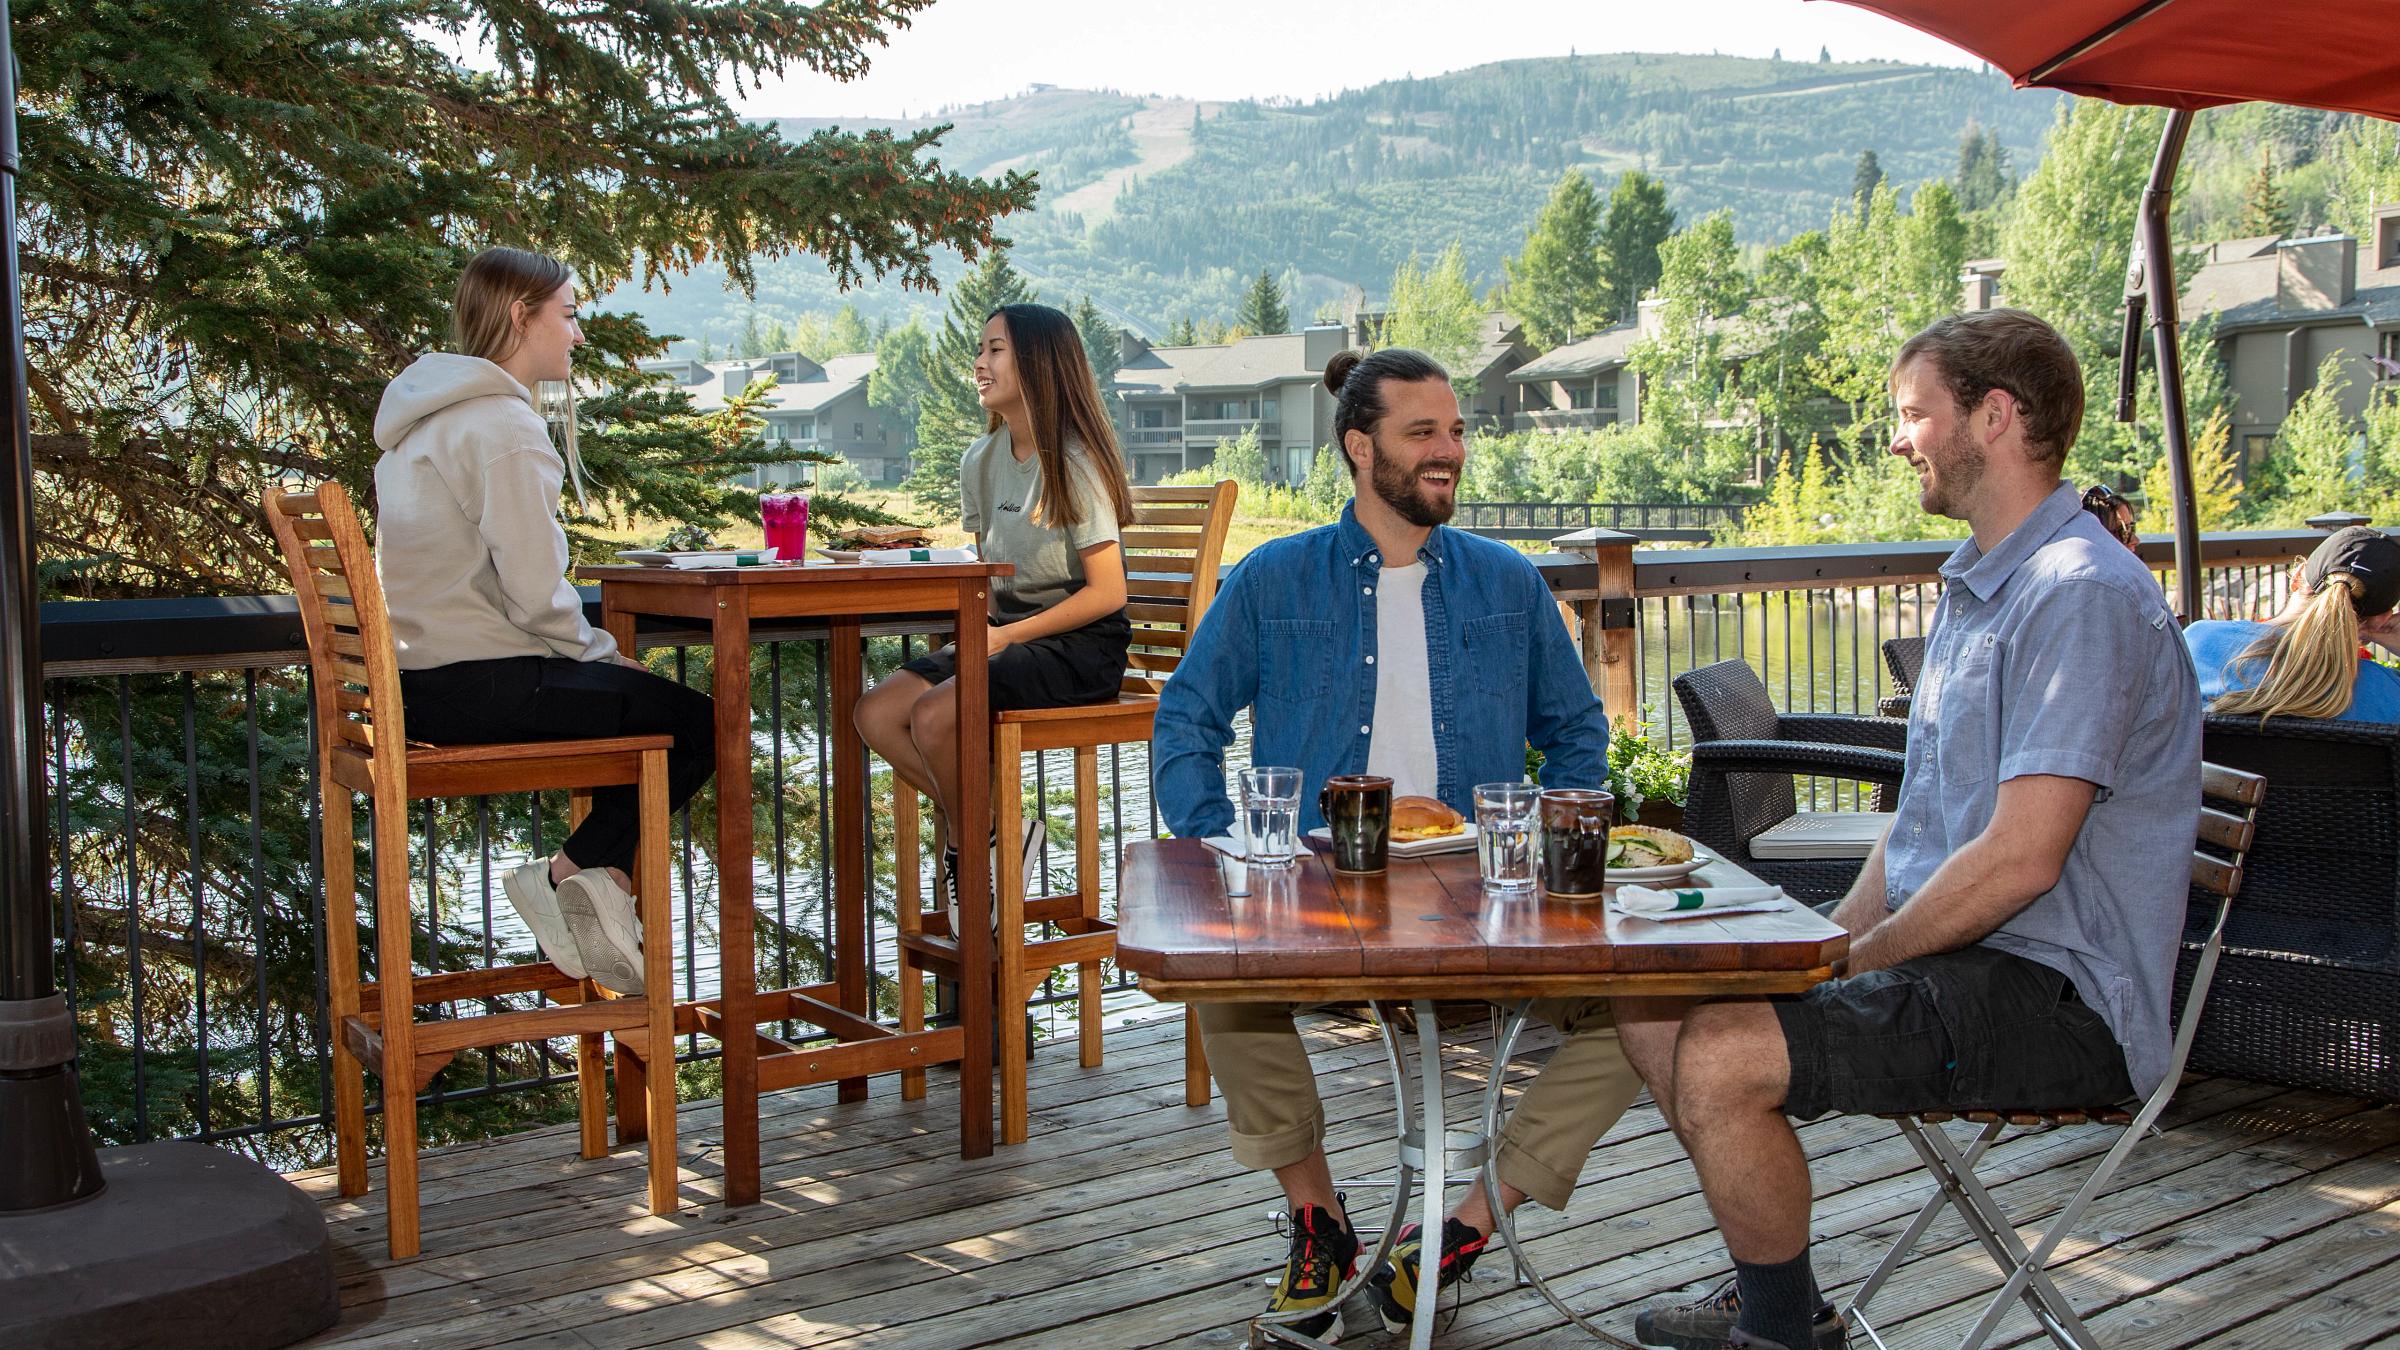 Guests eating on the deck of Deer Valley Grocery Cafe